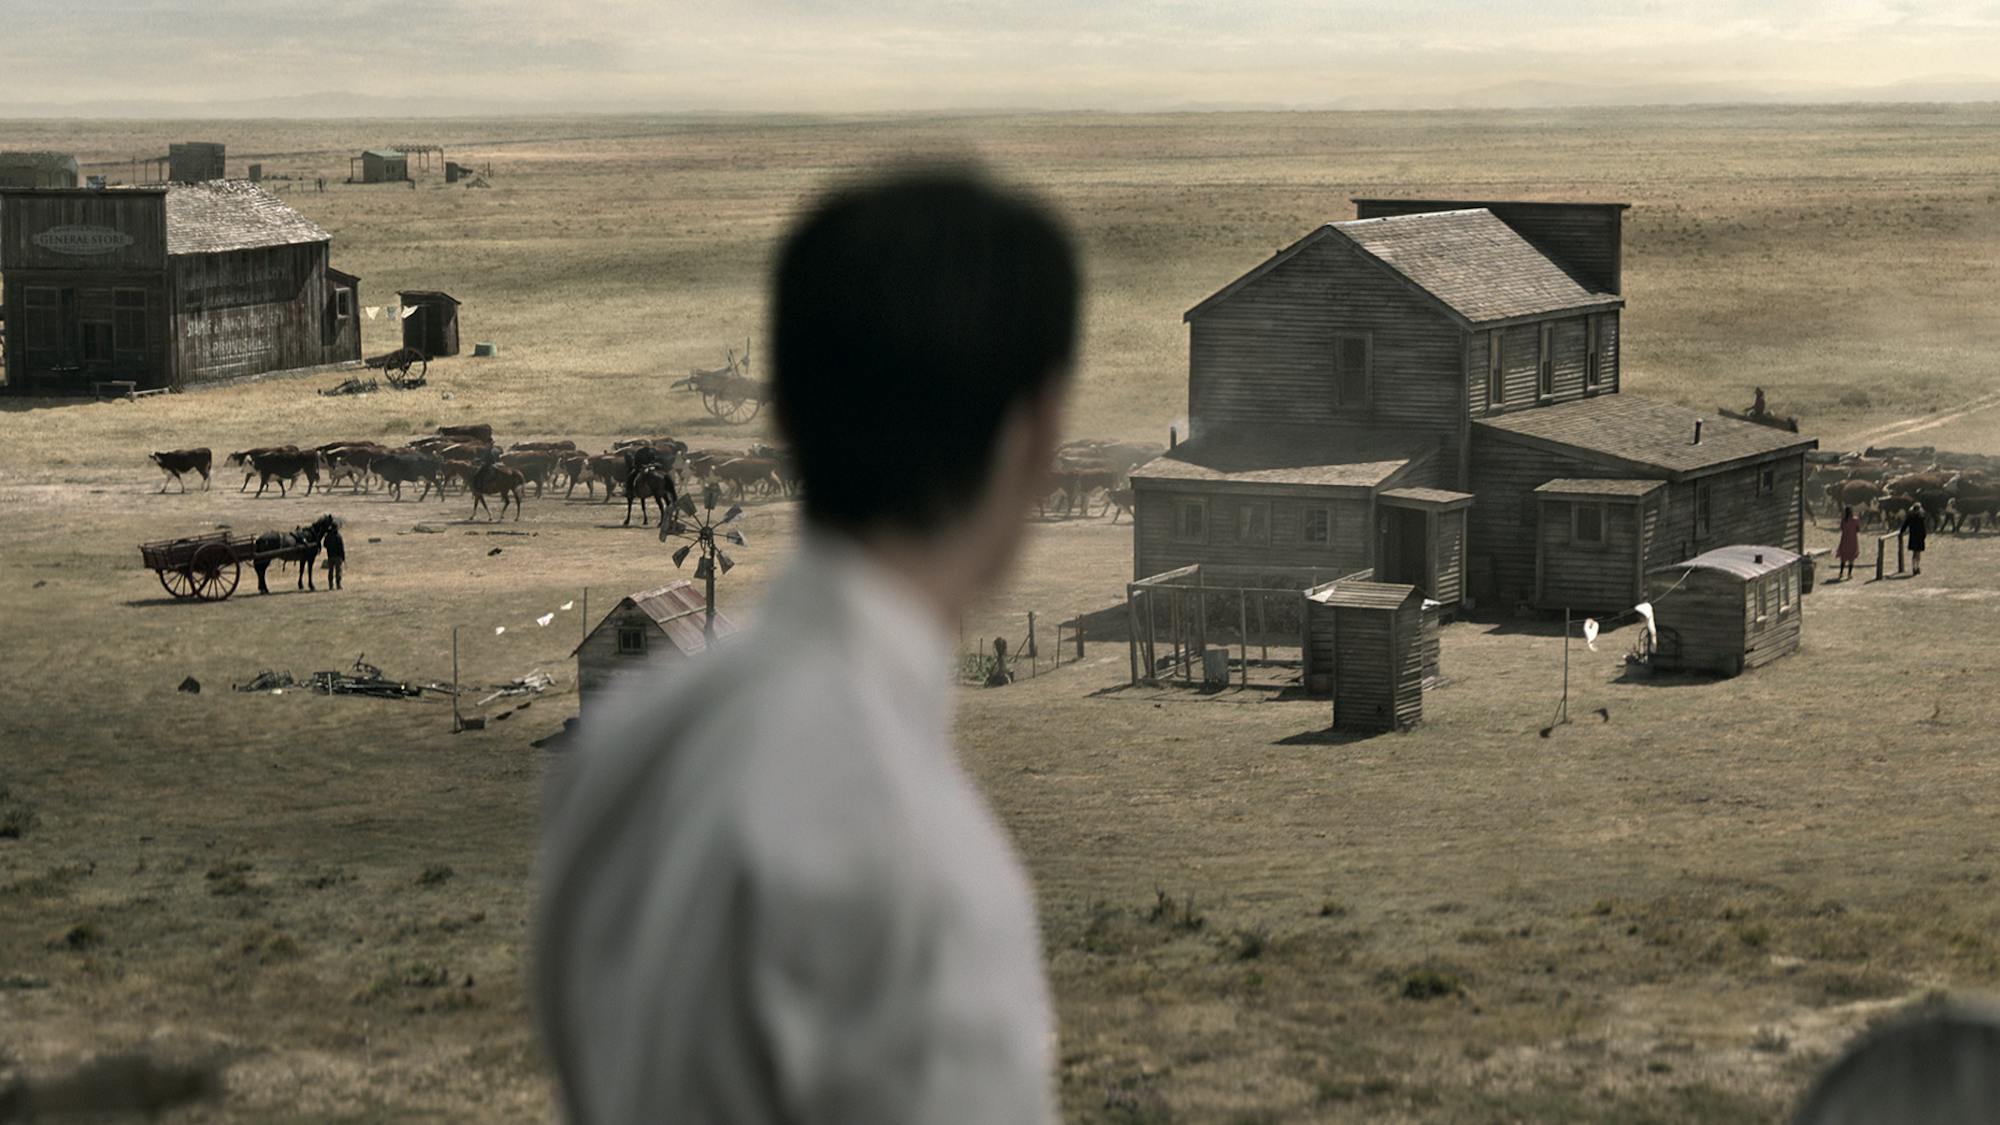 Kodi Smit-McPhee stands with his back to the camera in this blurry shot. There are horses and buildings dotting the dusty ground in front of him